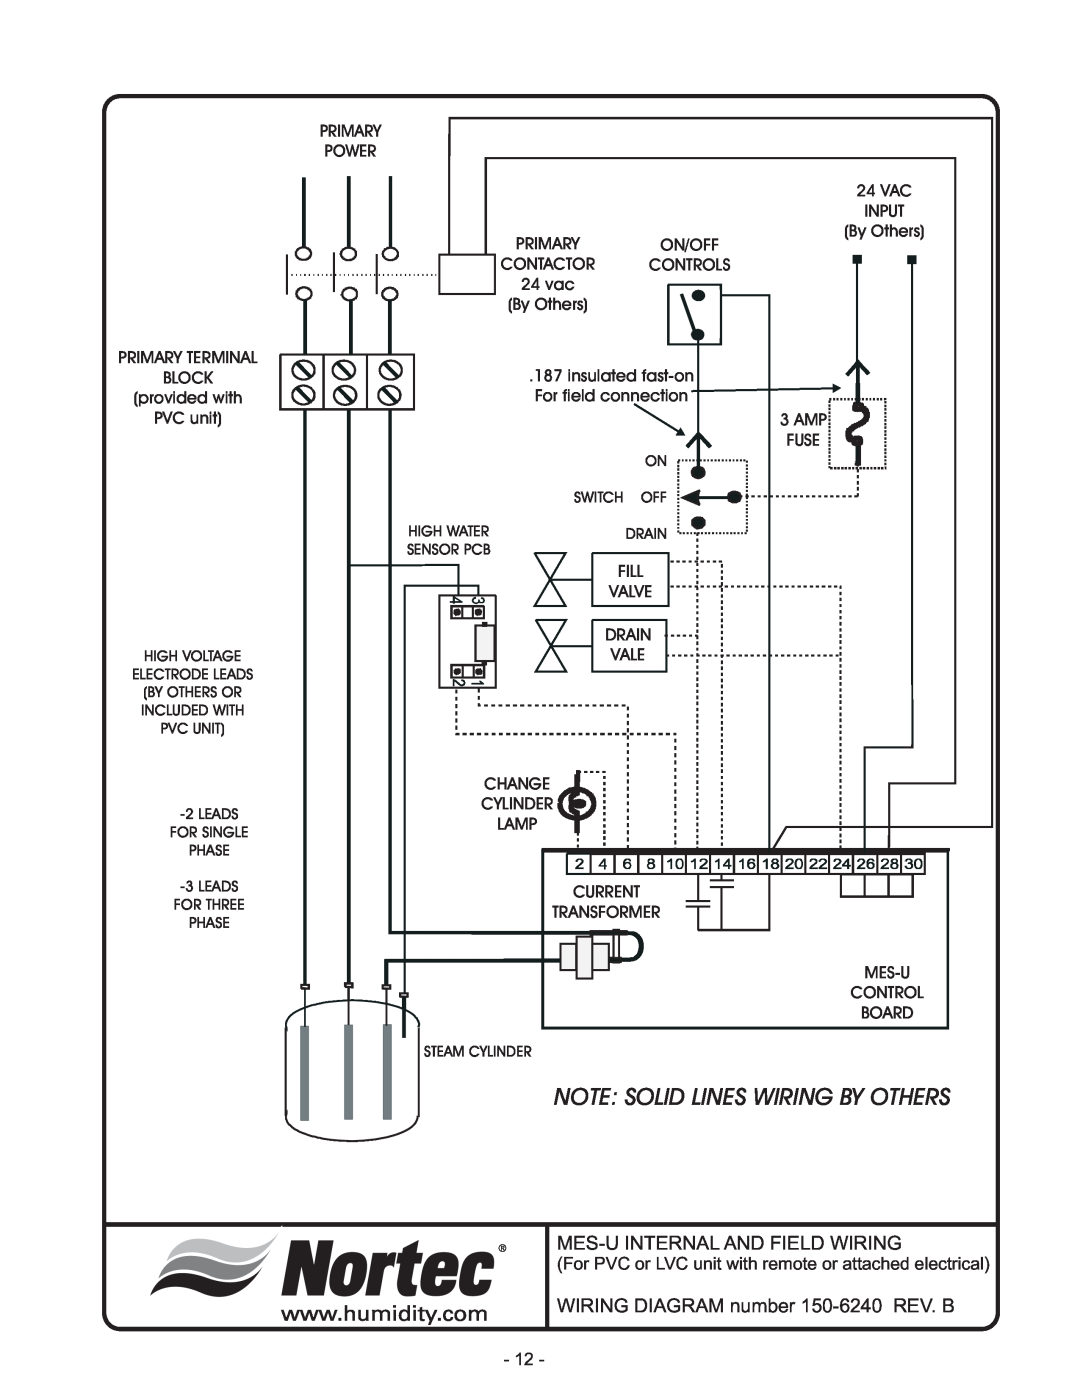 Nortec Industries None manual Note Solid Lines Wiring By Others, Mes-Uinternal And Field Wiring 